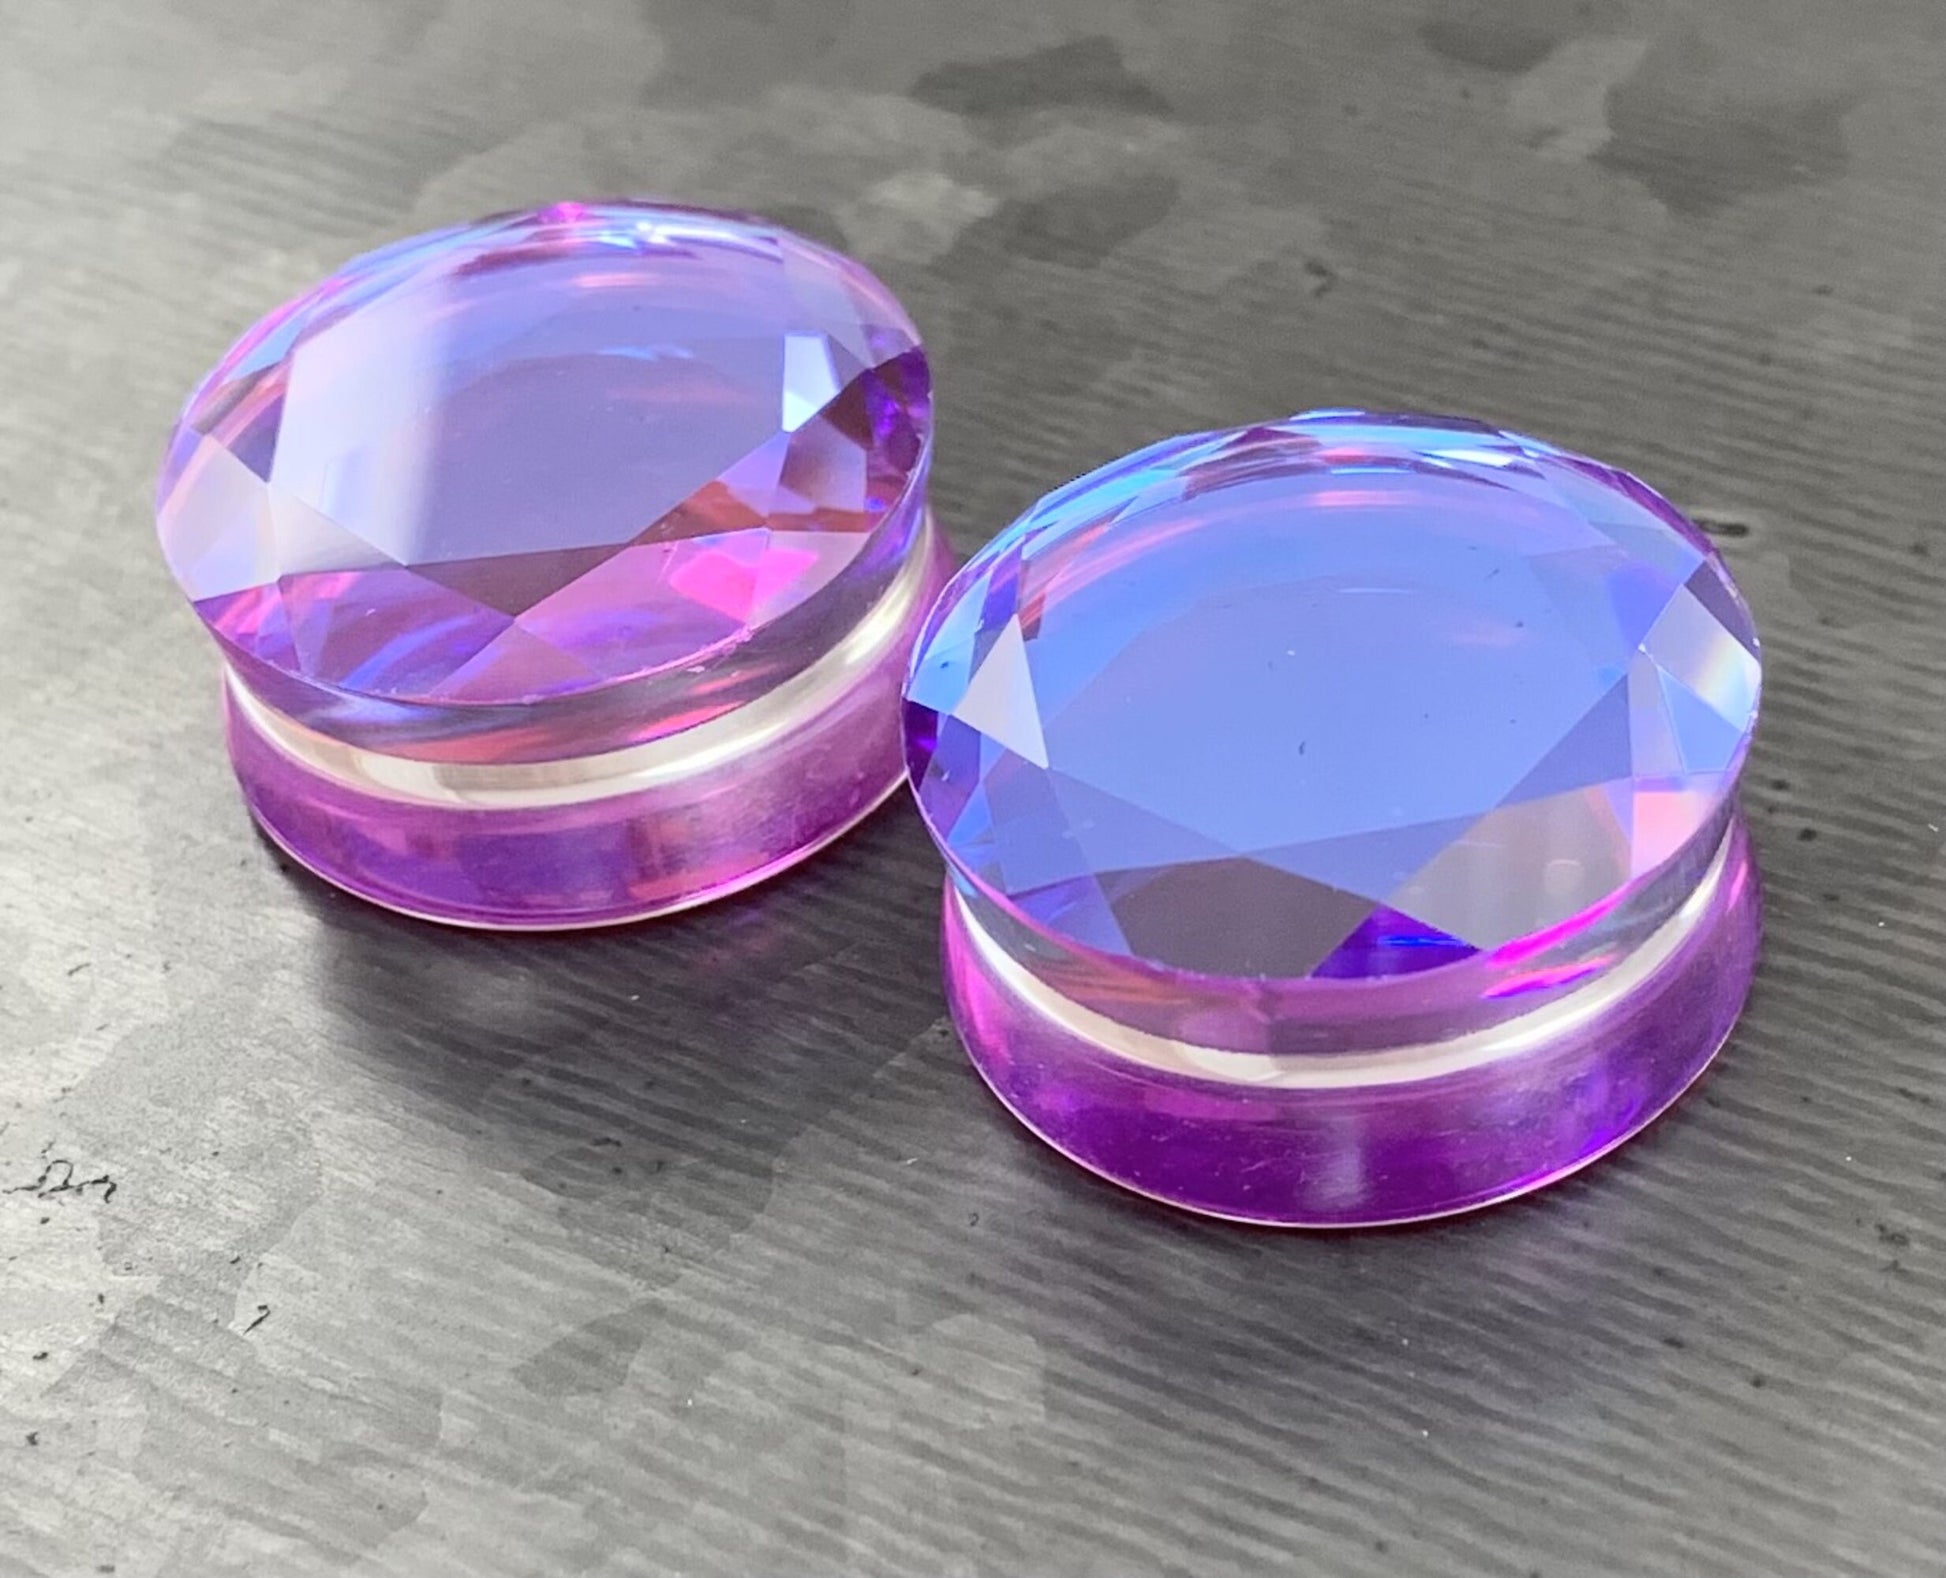 PAIR of Stunning Faceted Mermaid Iridescent Glass Double Flare Plugs - Gauges 2g (6.5mm) thru 1" (25mm) available!